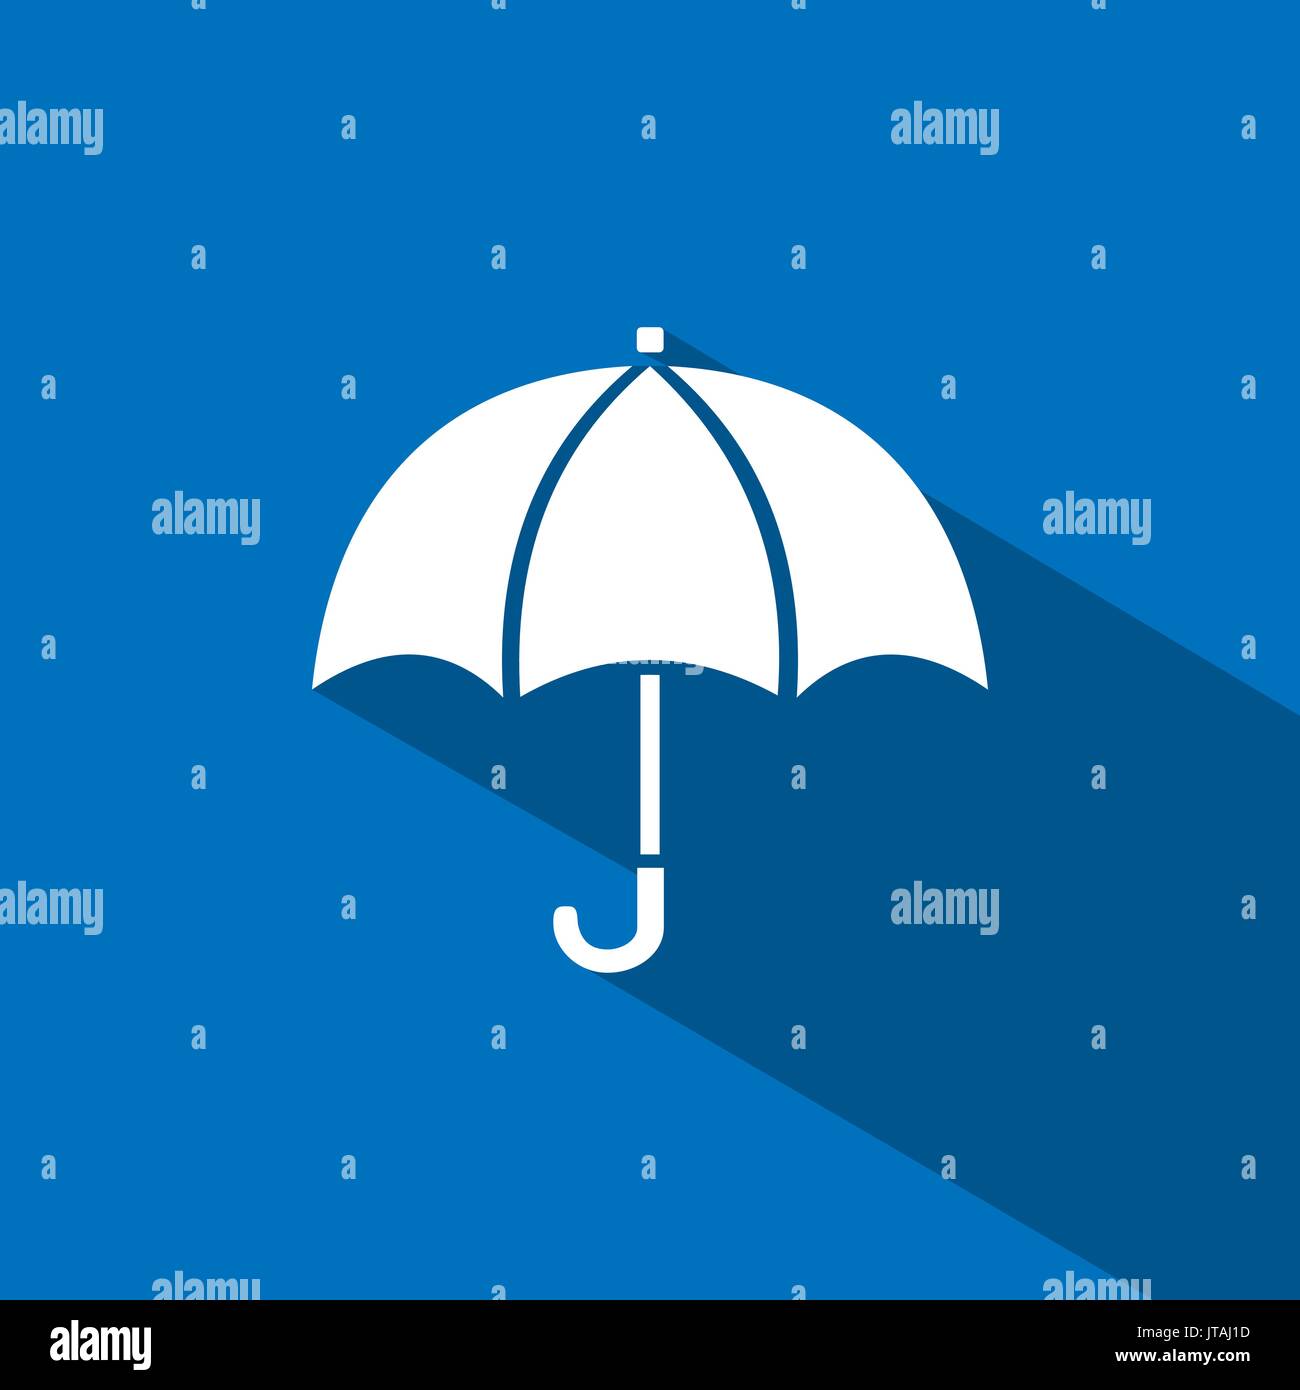 Umbrella icon with shade on blue background Stock Vector